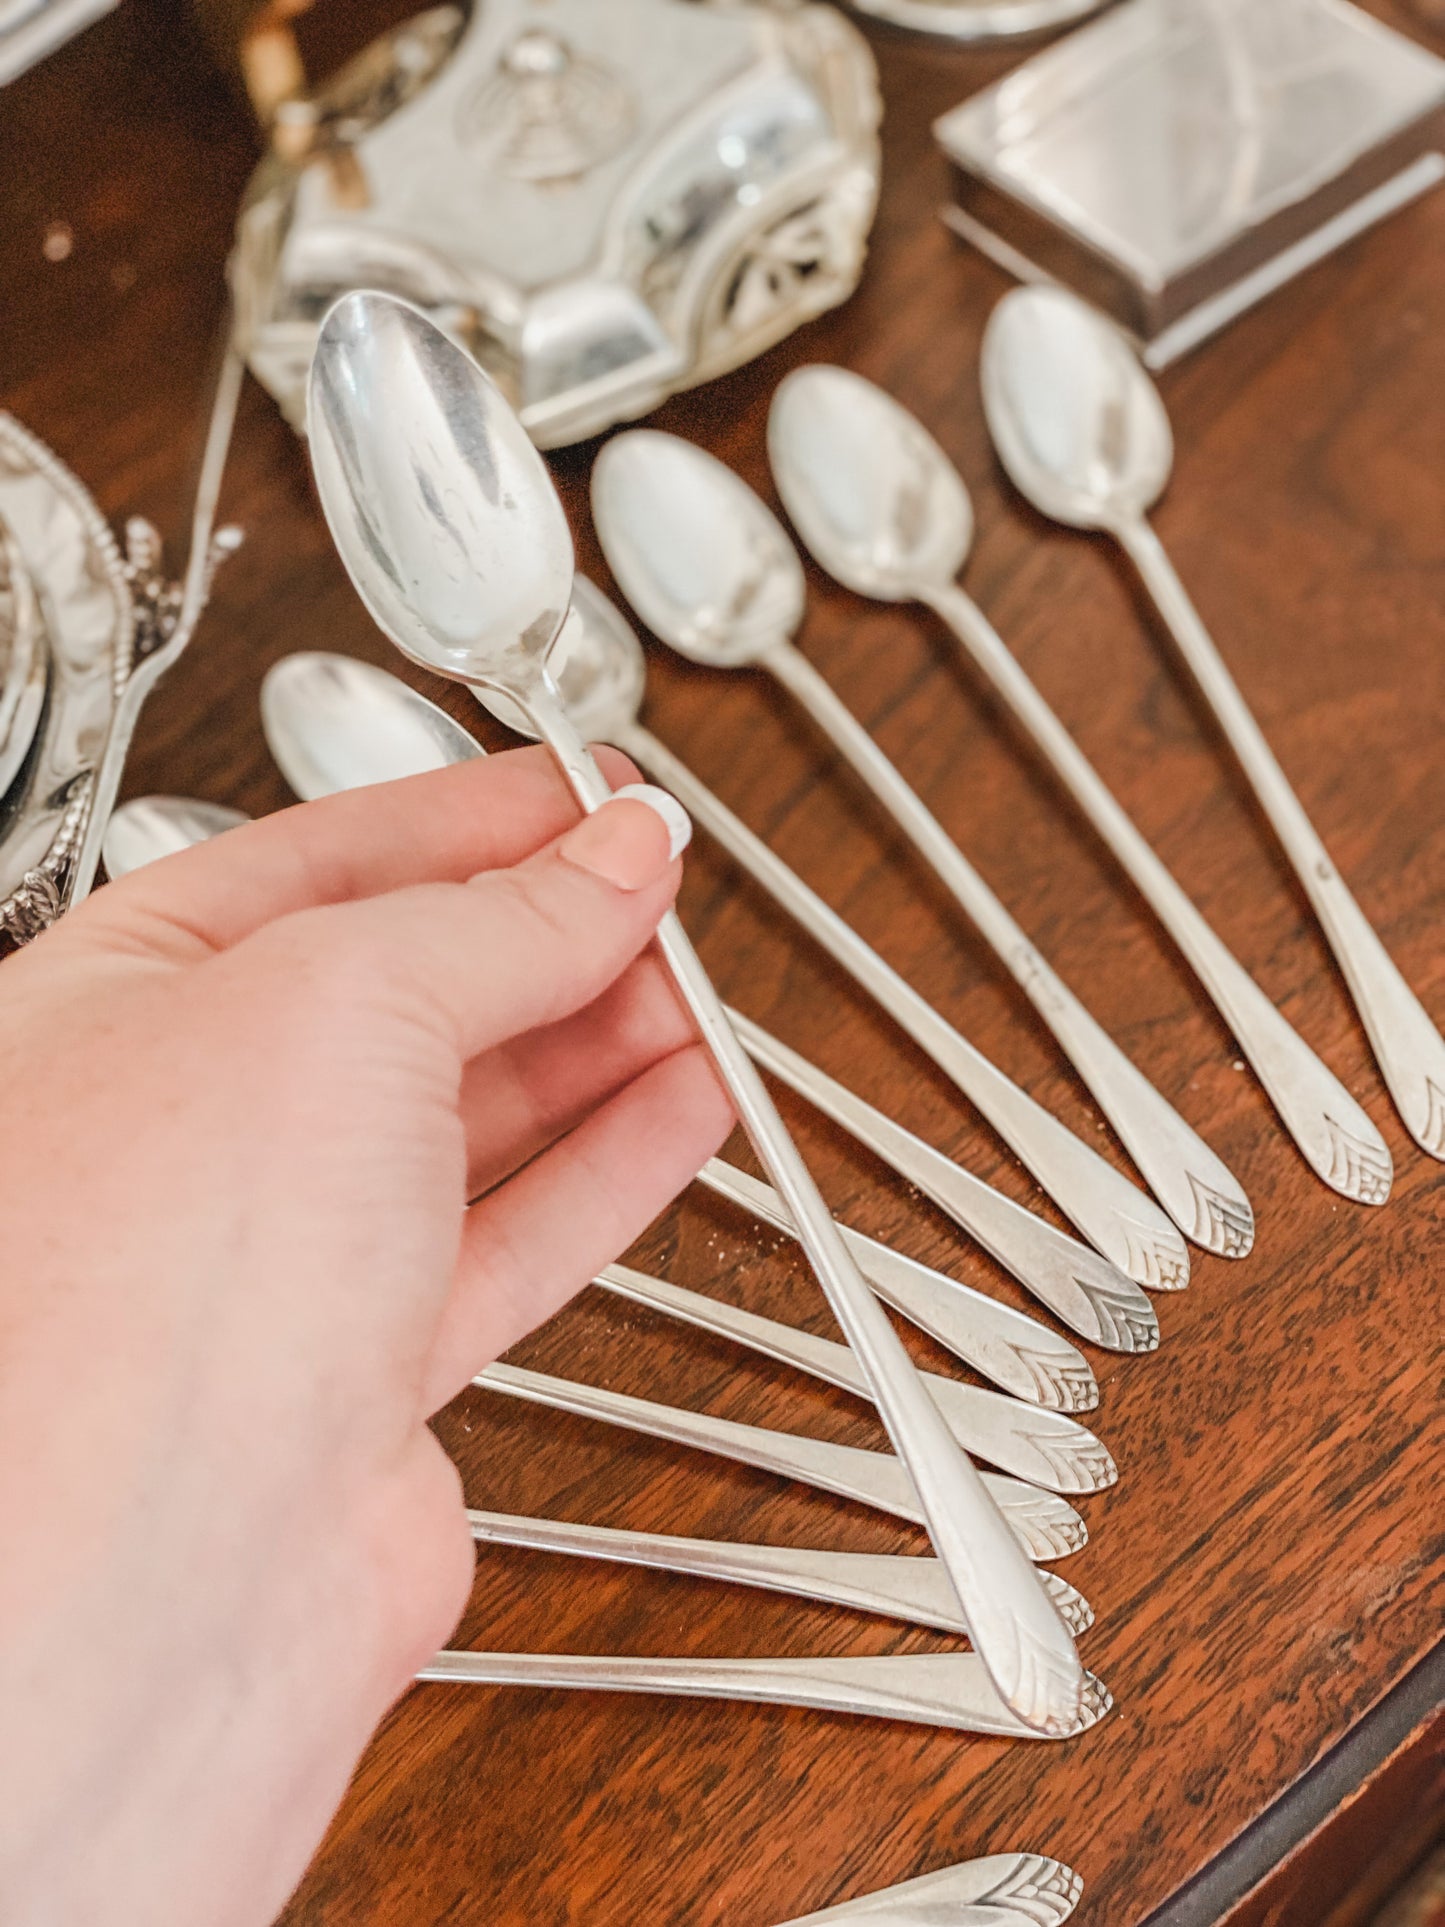 Set of 12 Iced Tea Spoons Made in 1934